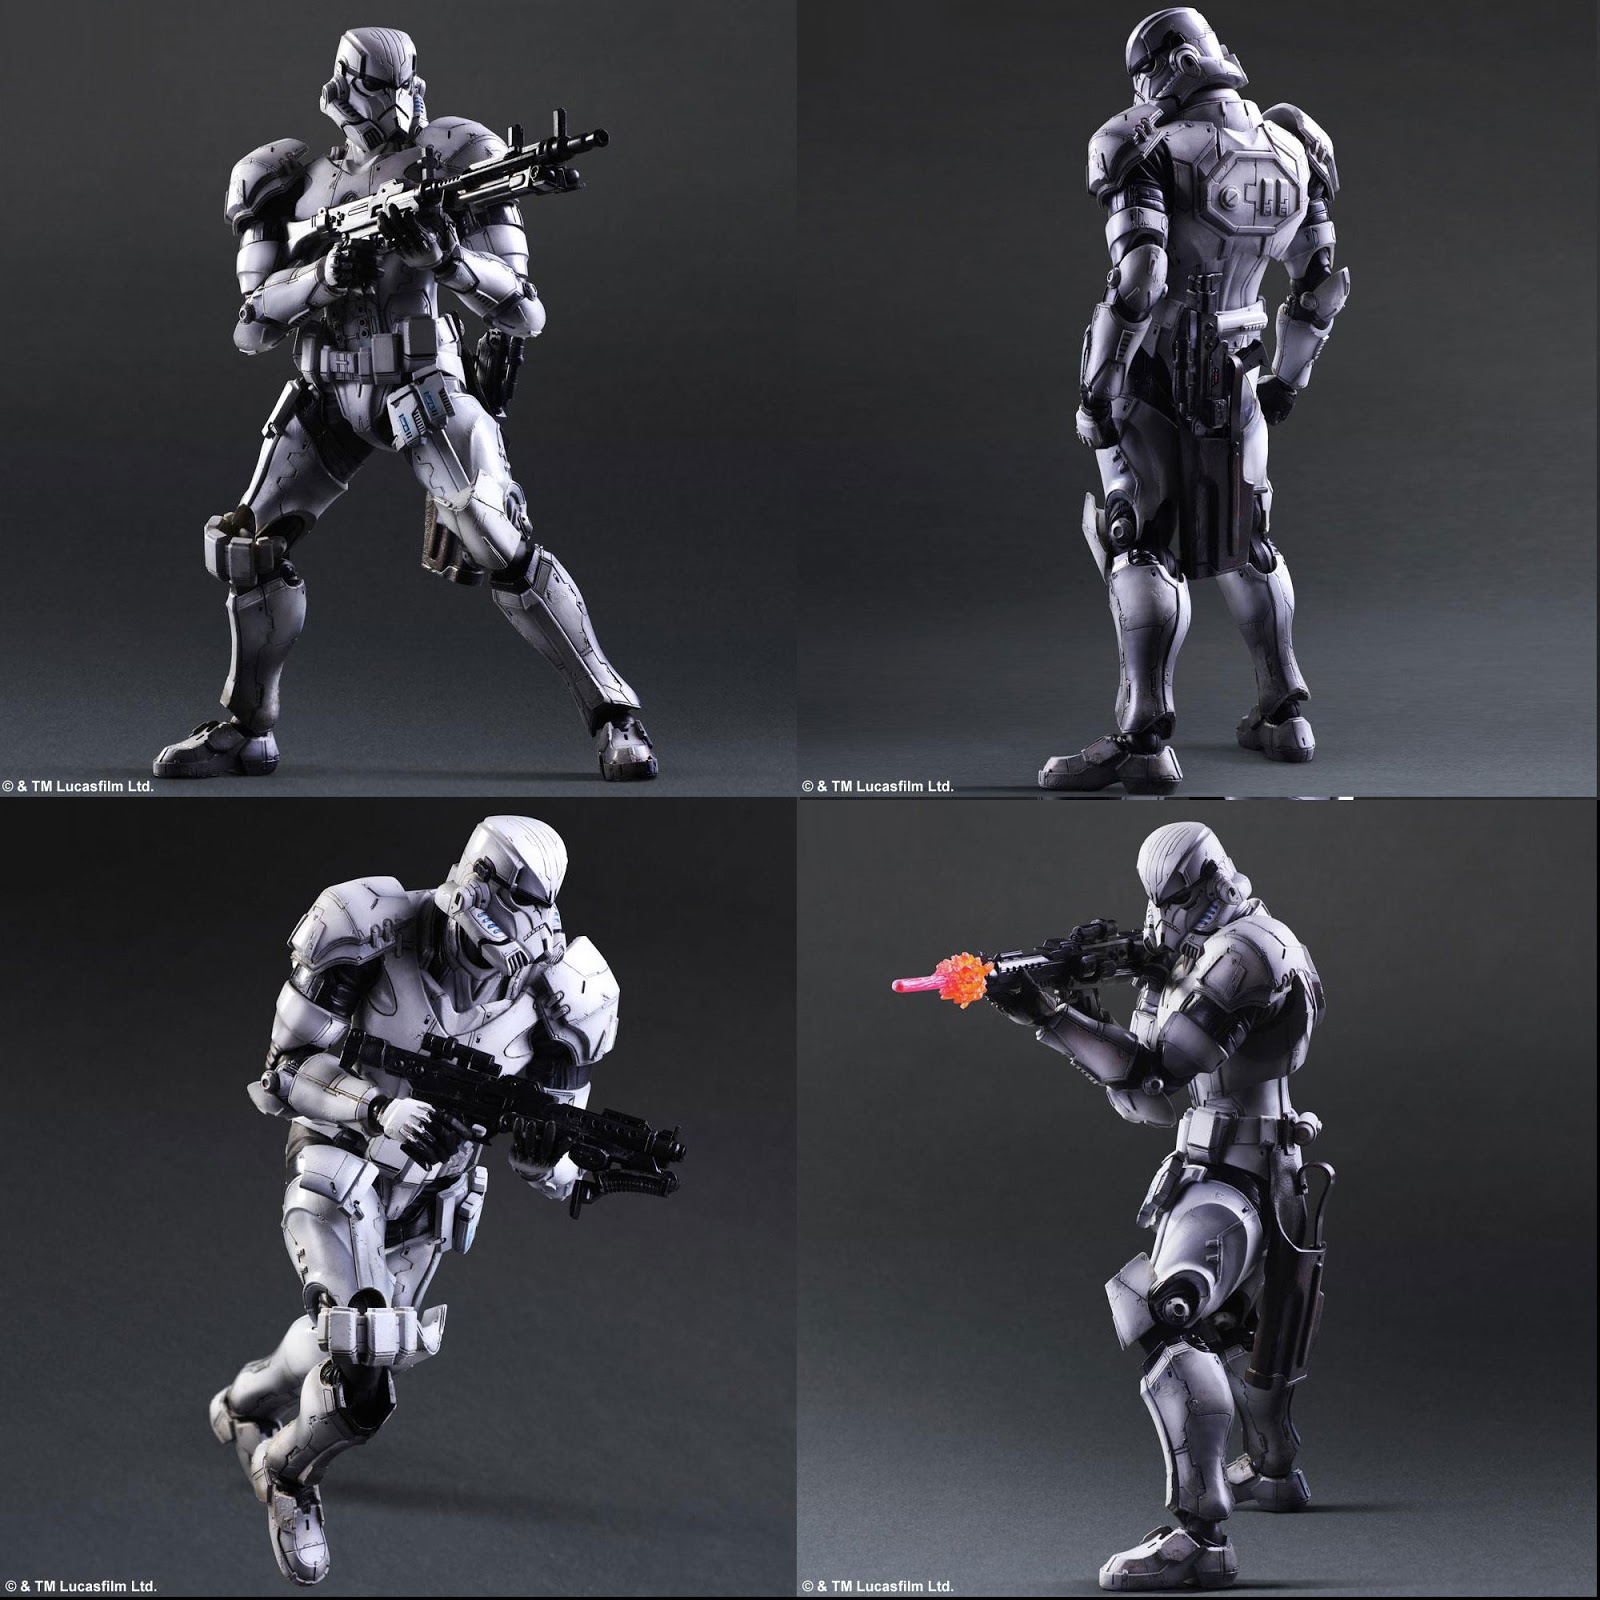 Star Wars Variant Play Arts Kai from SQUARE ENIX - Trooper Star Wars Variant Play Arts Kai From SQUARE ENIX 1